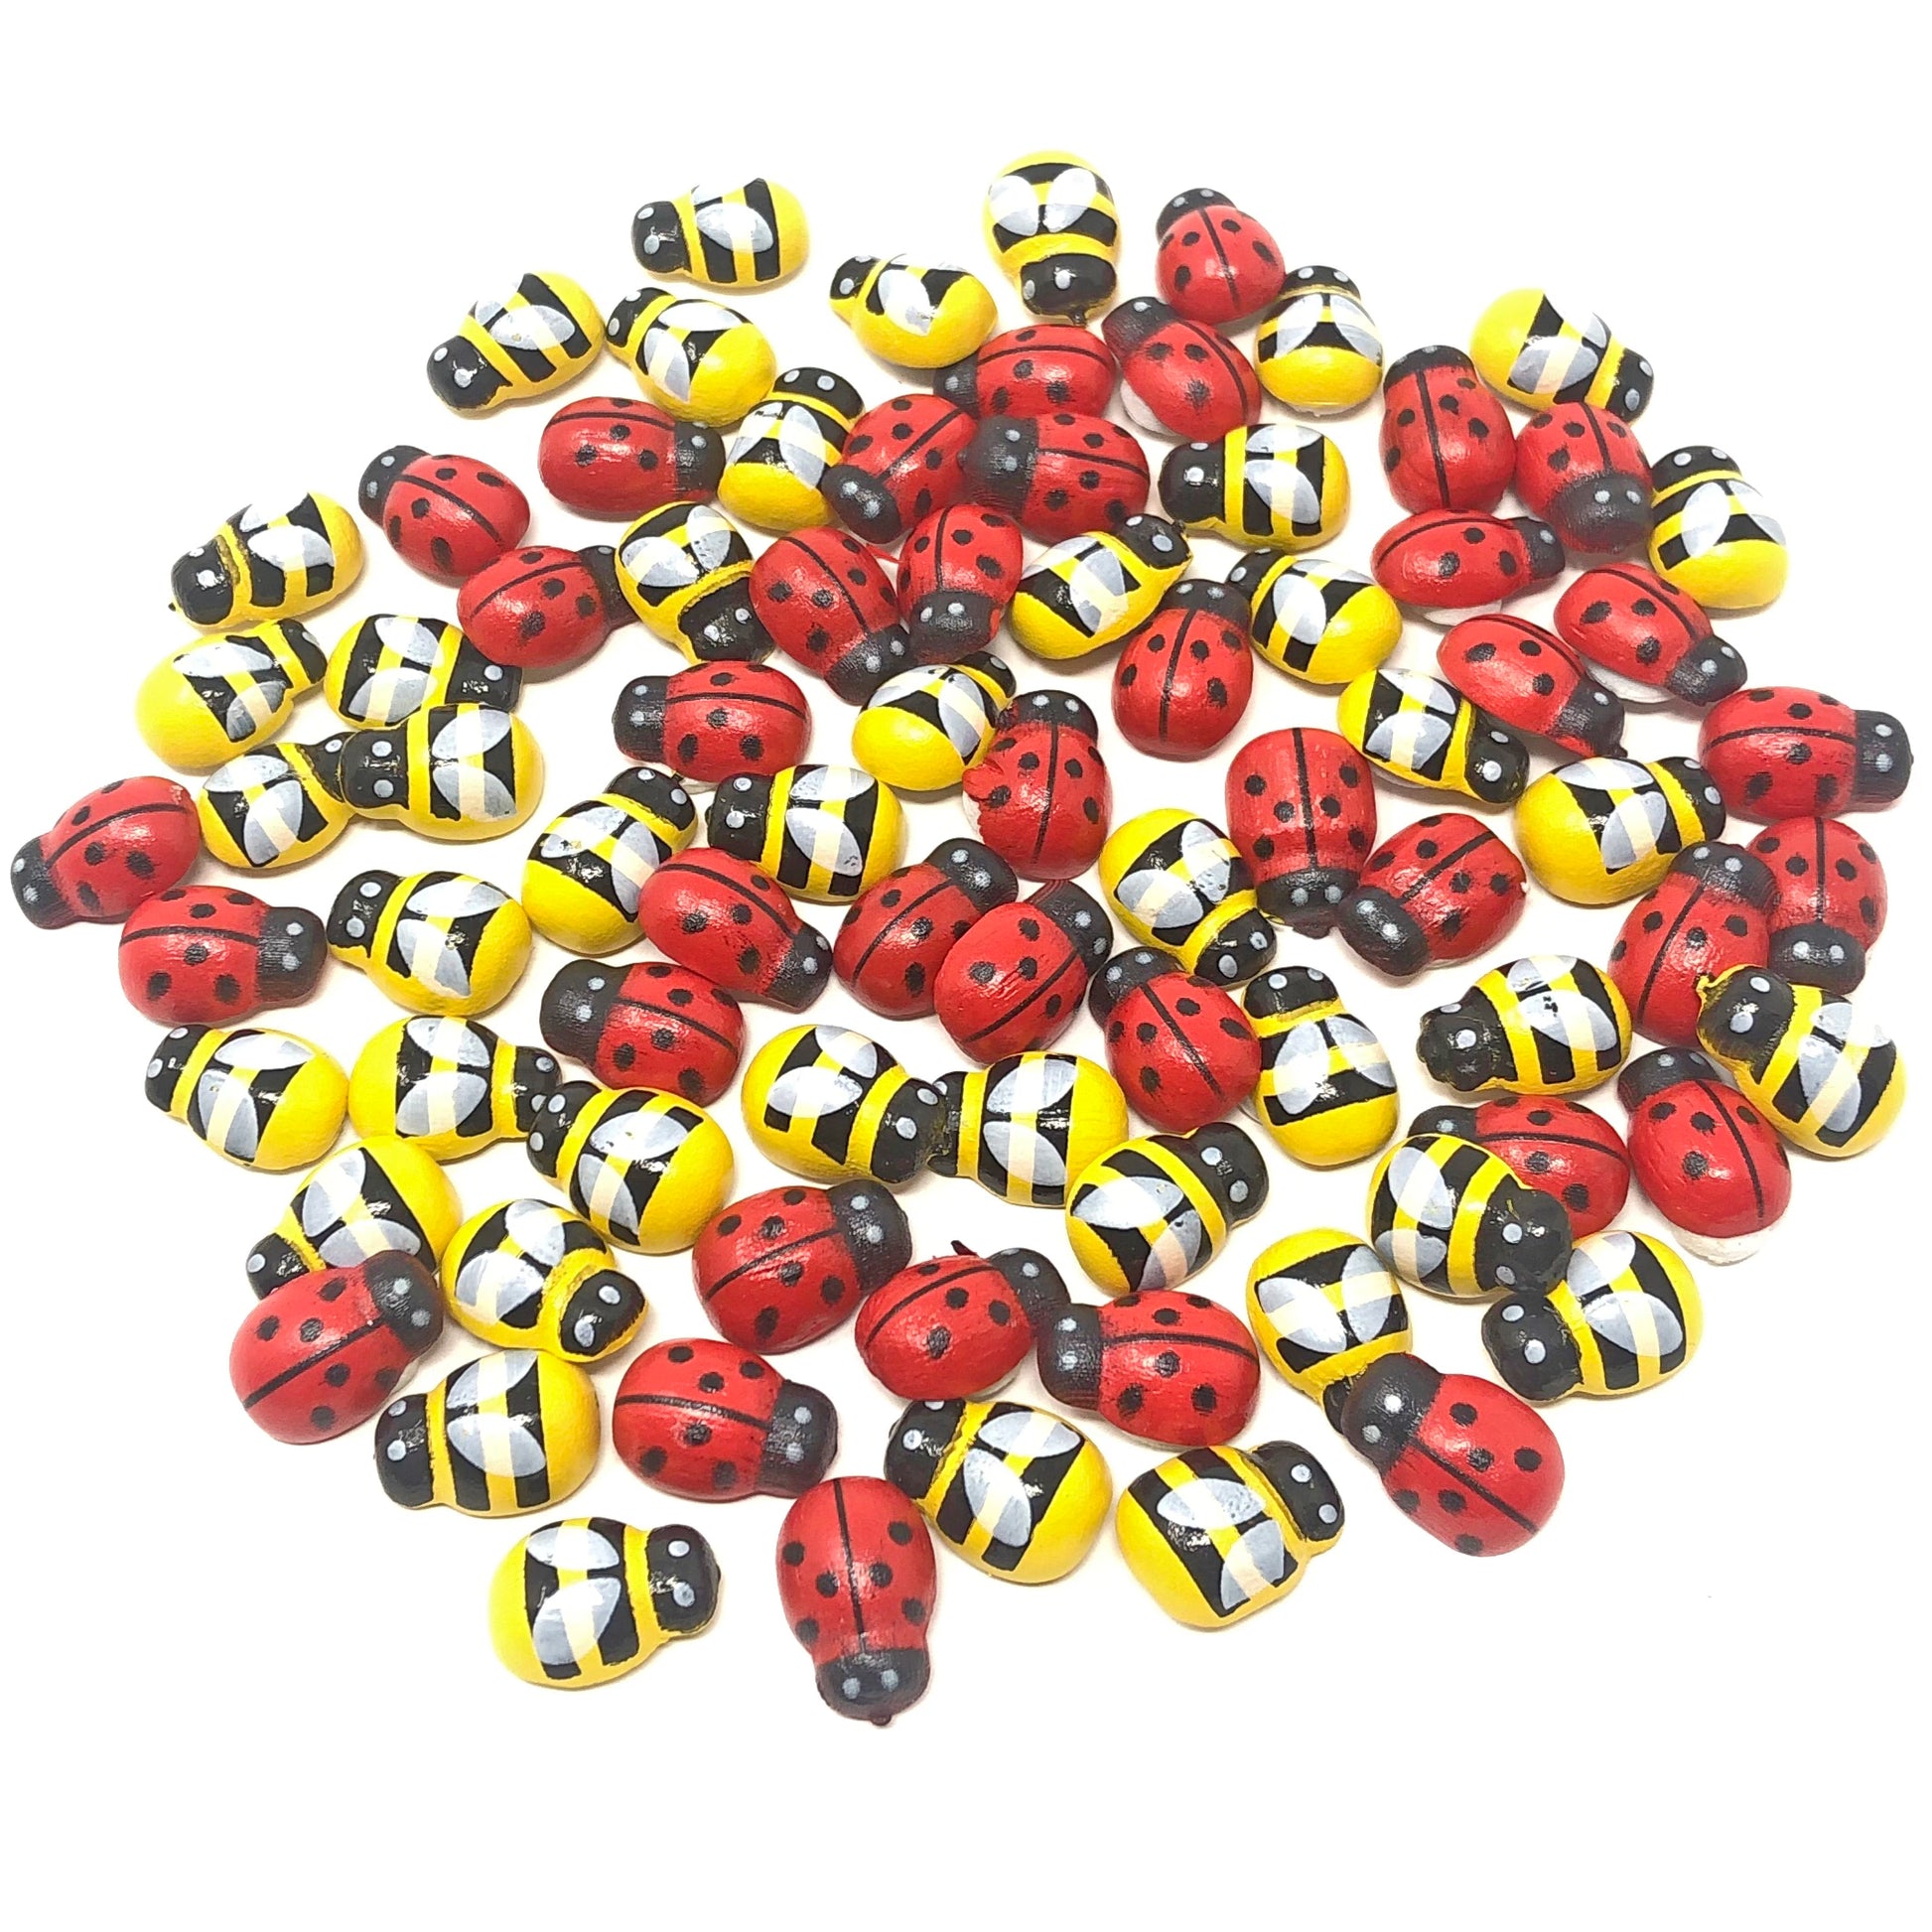 Yellow & Red Mini 9x12mm Mixed Bees & Ladybirds Self Adhesive Wood Toppers